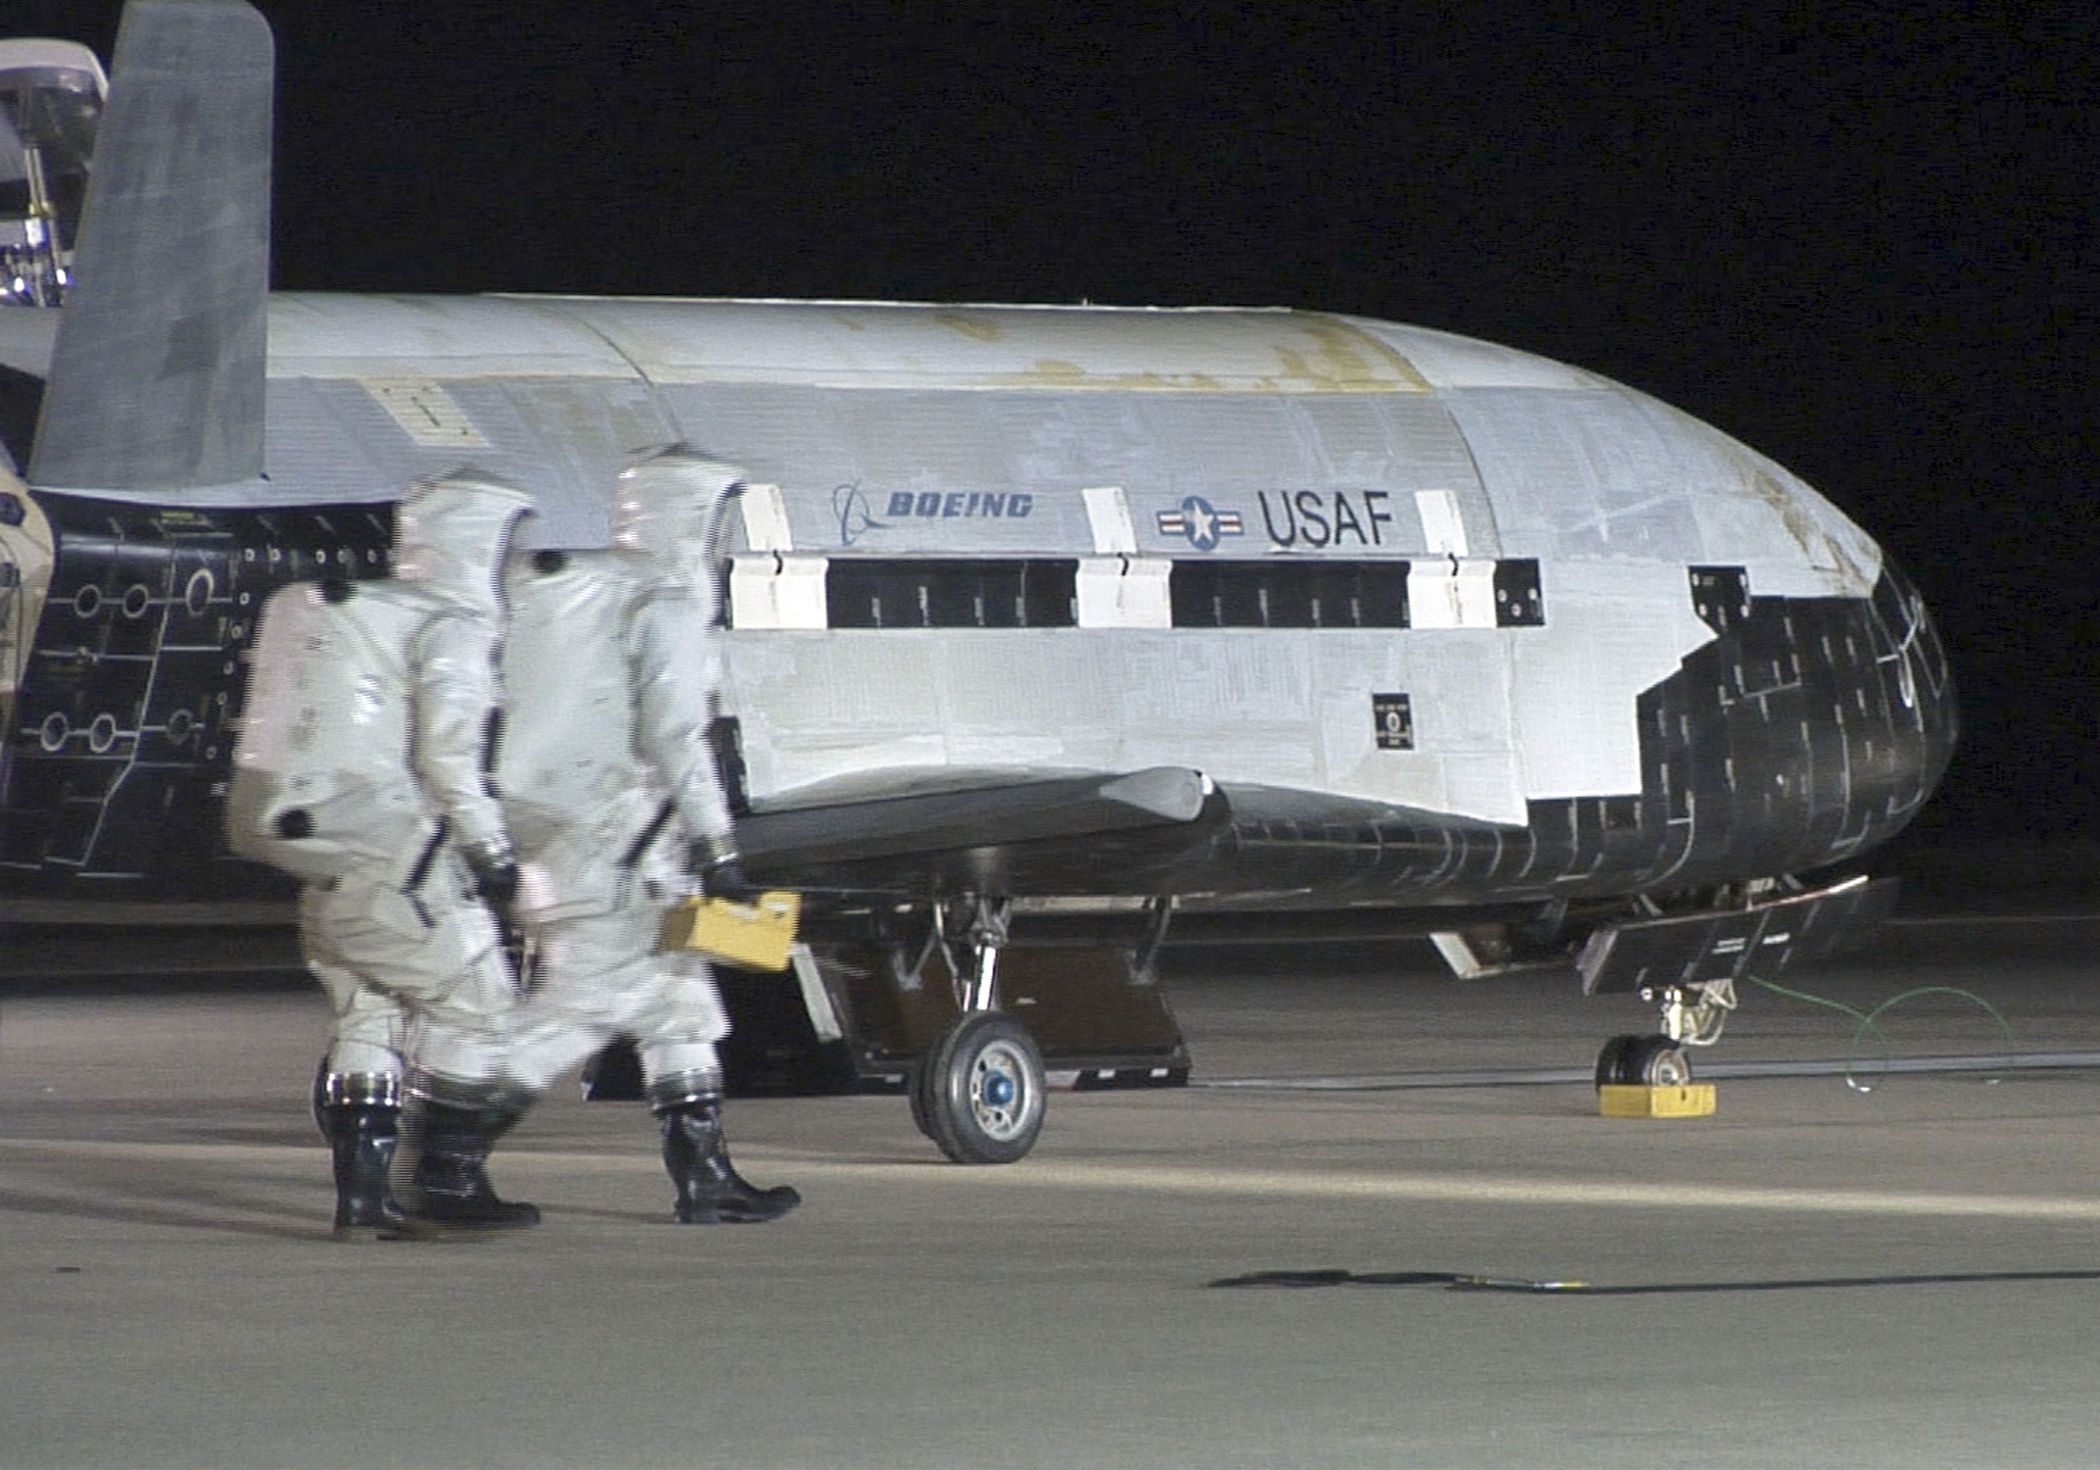 An image of the X-37B secret space plane. Image Credit: DoD.